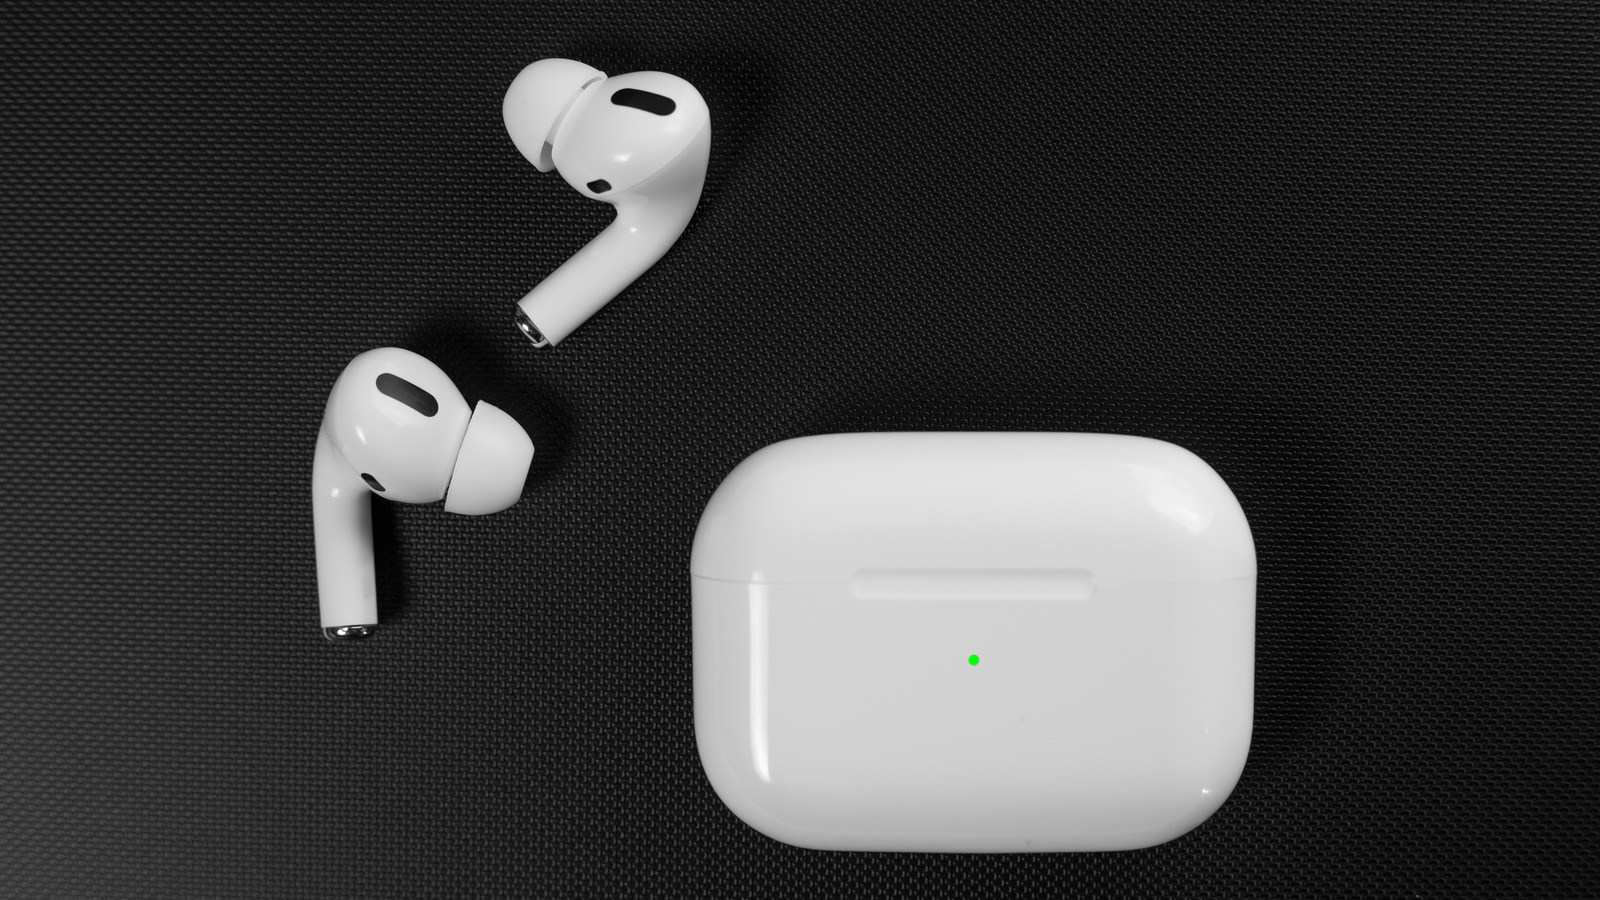 Godkendelse krig glide Here's What To Do If Your AirPods Case Stops Charging